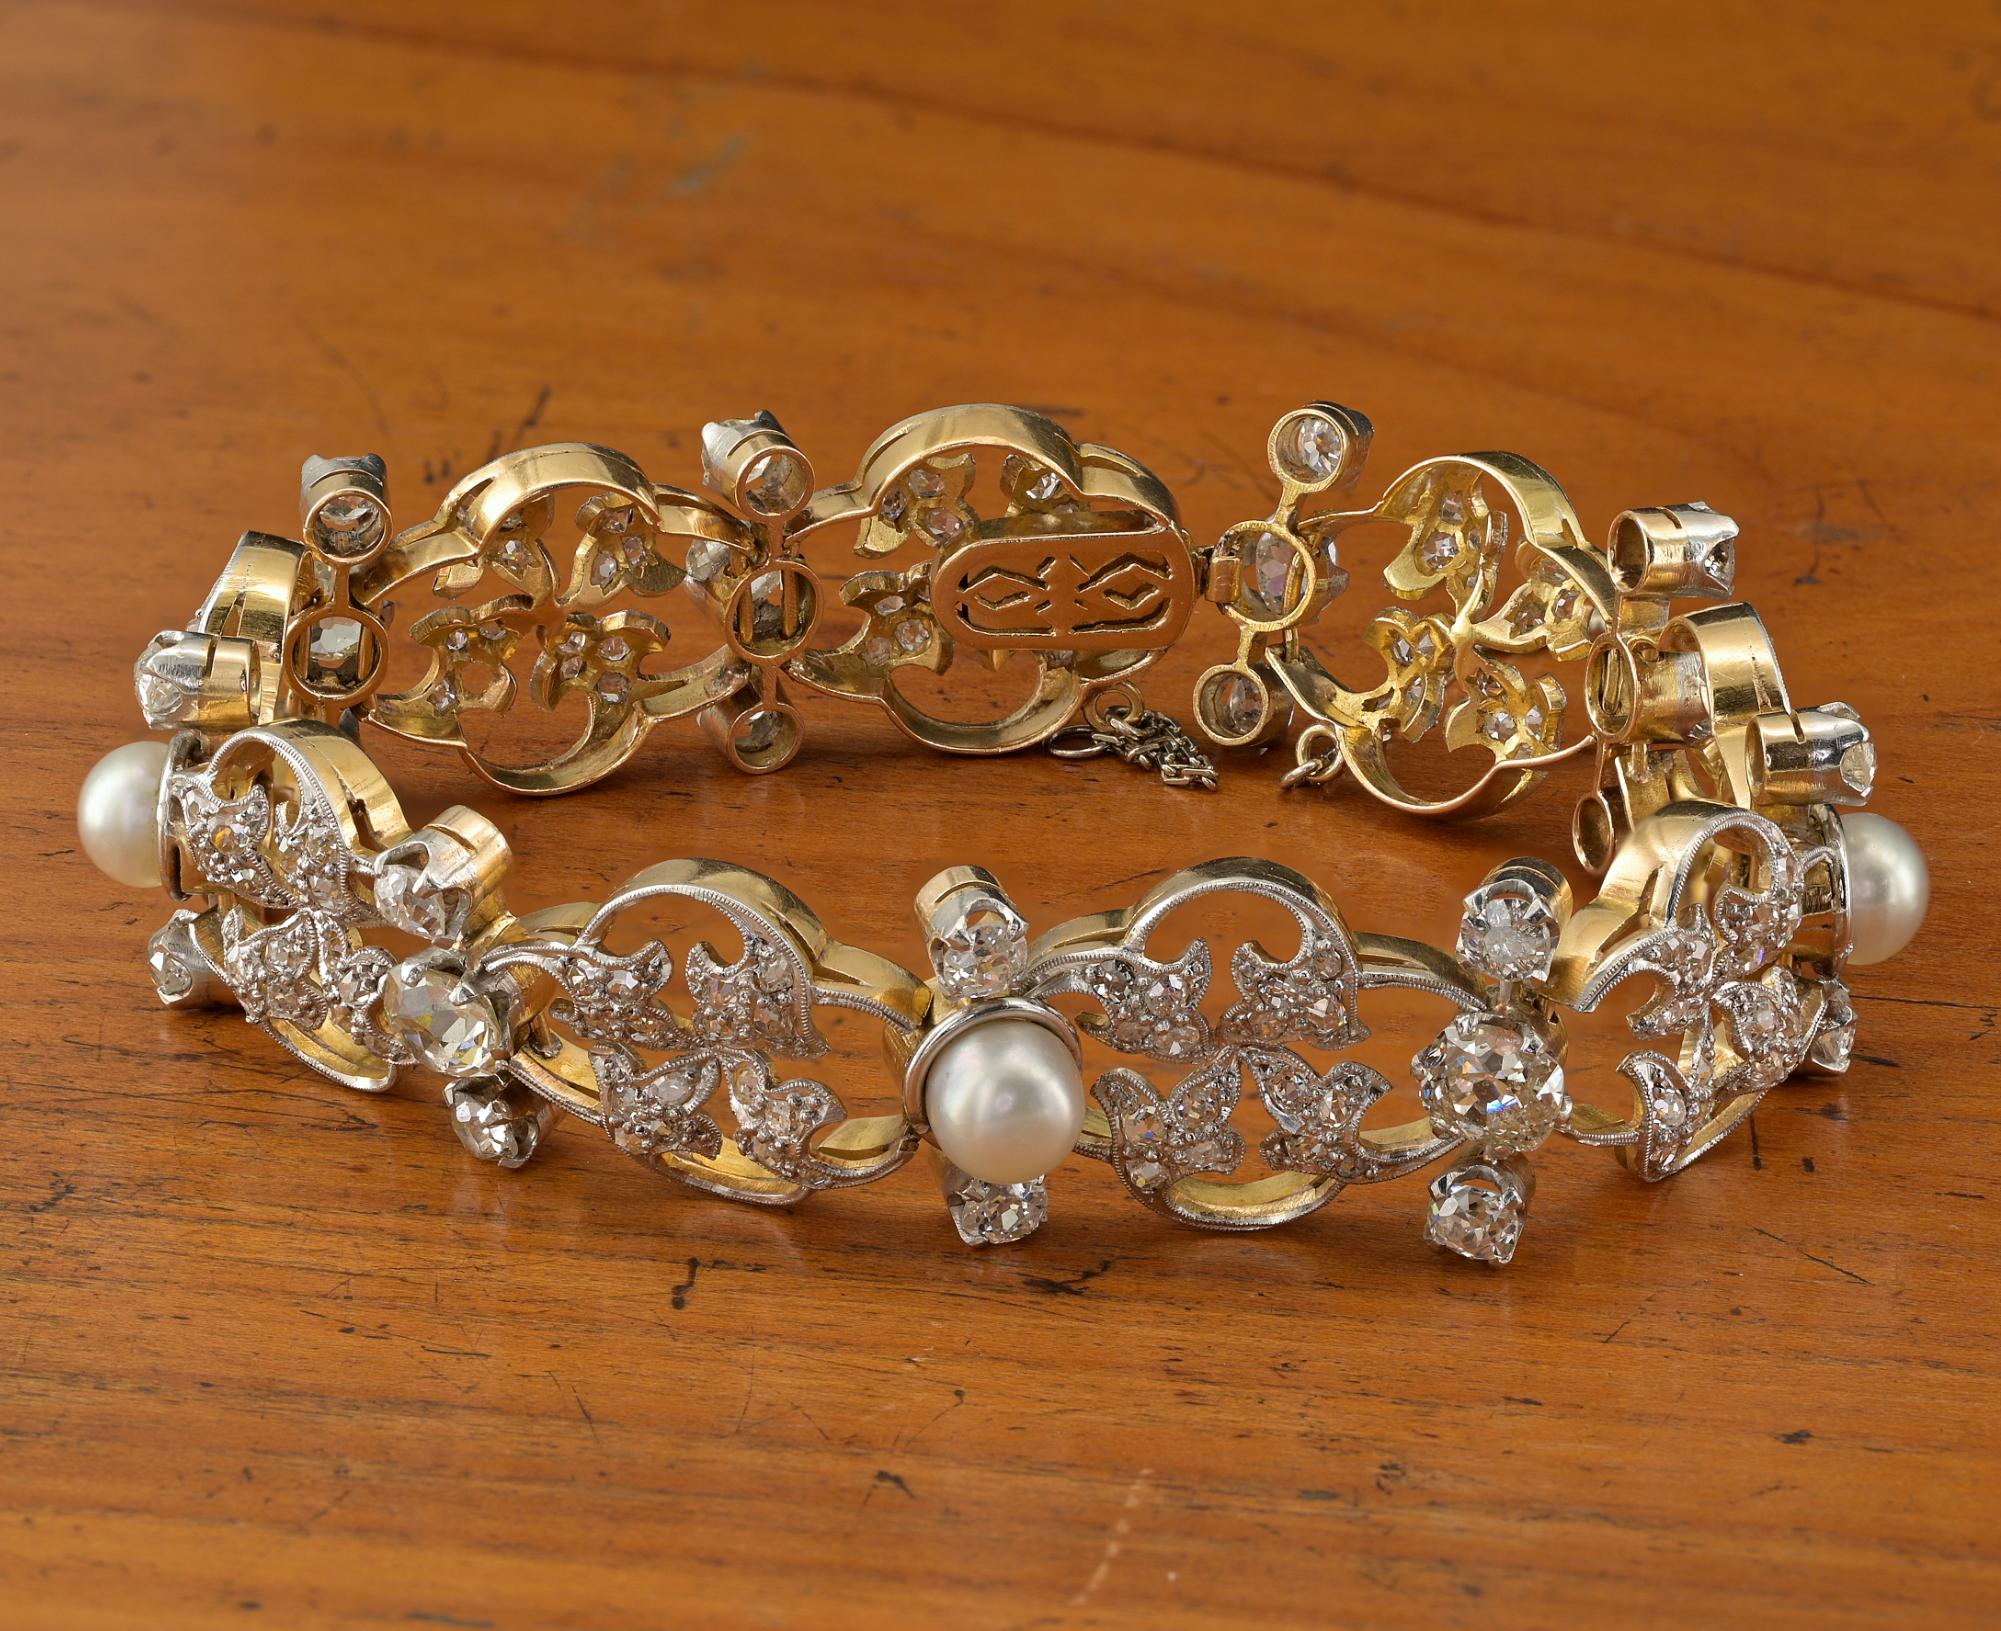 This outstanding Art Nouveau barcelet is 1900 ca
Superb past workmanship rendered of solid 18 KT gold Platinum topped
Fine design of leaf work expressed in sinuos curvilinear lines richly set with opulence of Diamonds and natural pearls
Fully